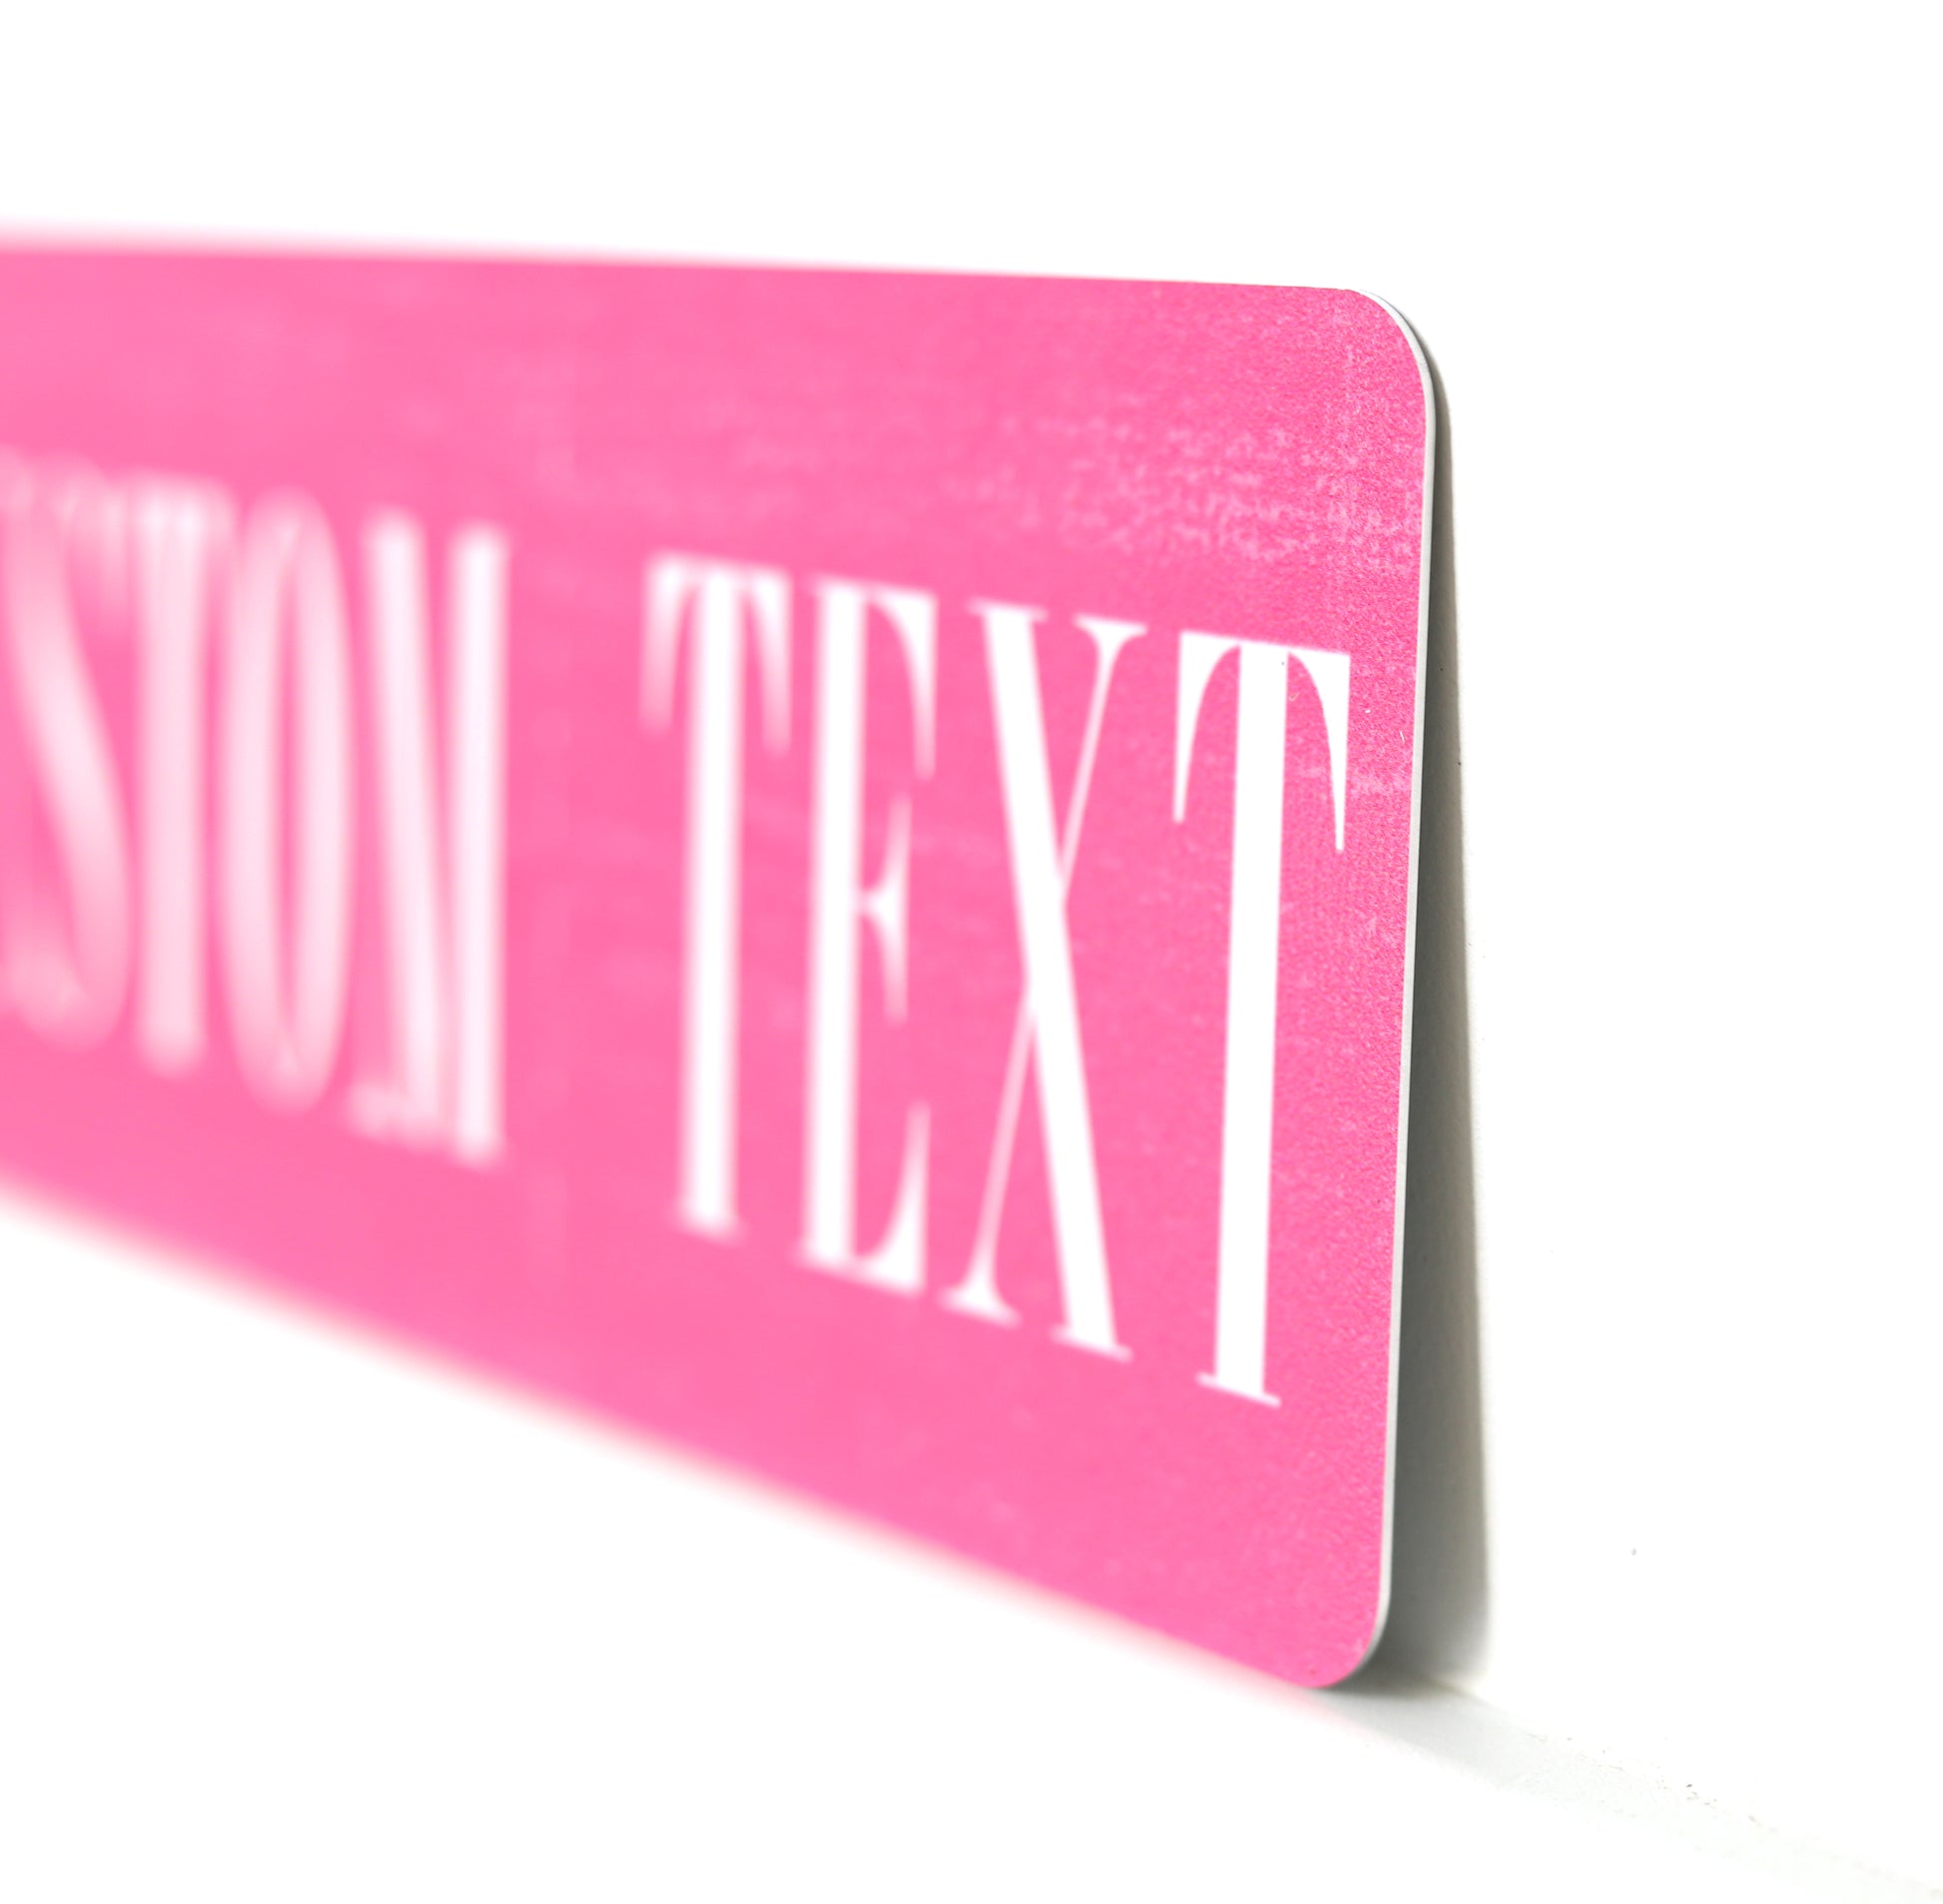 Custom Metal Sign | Brushed Hot Pink - The Sign Shoppe 